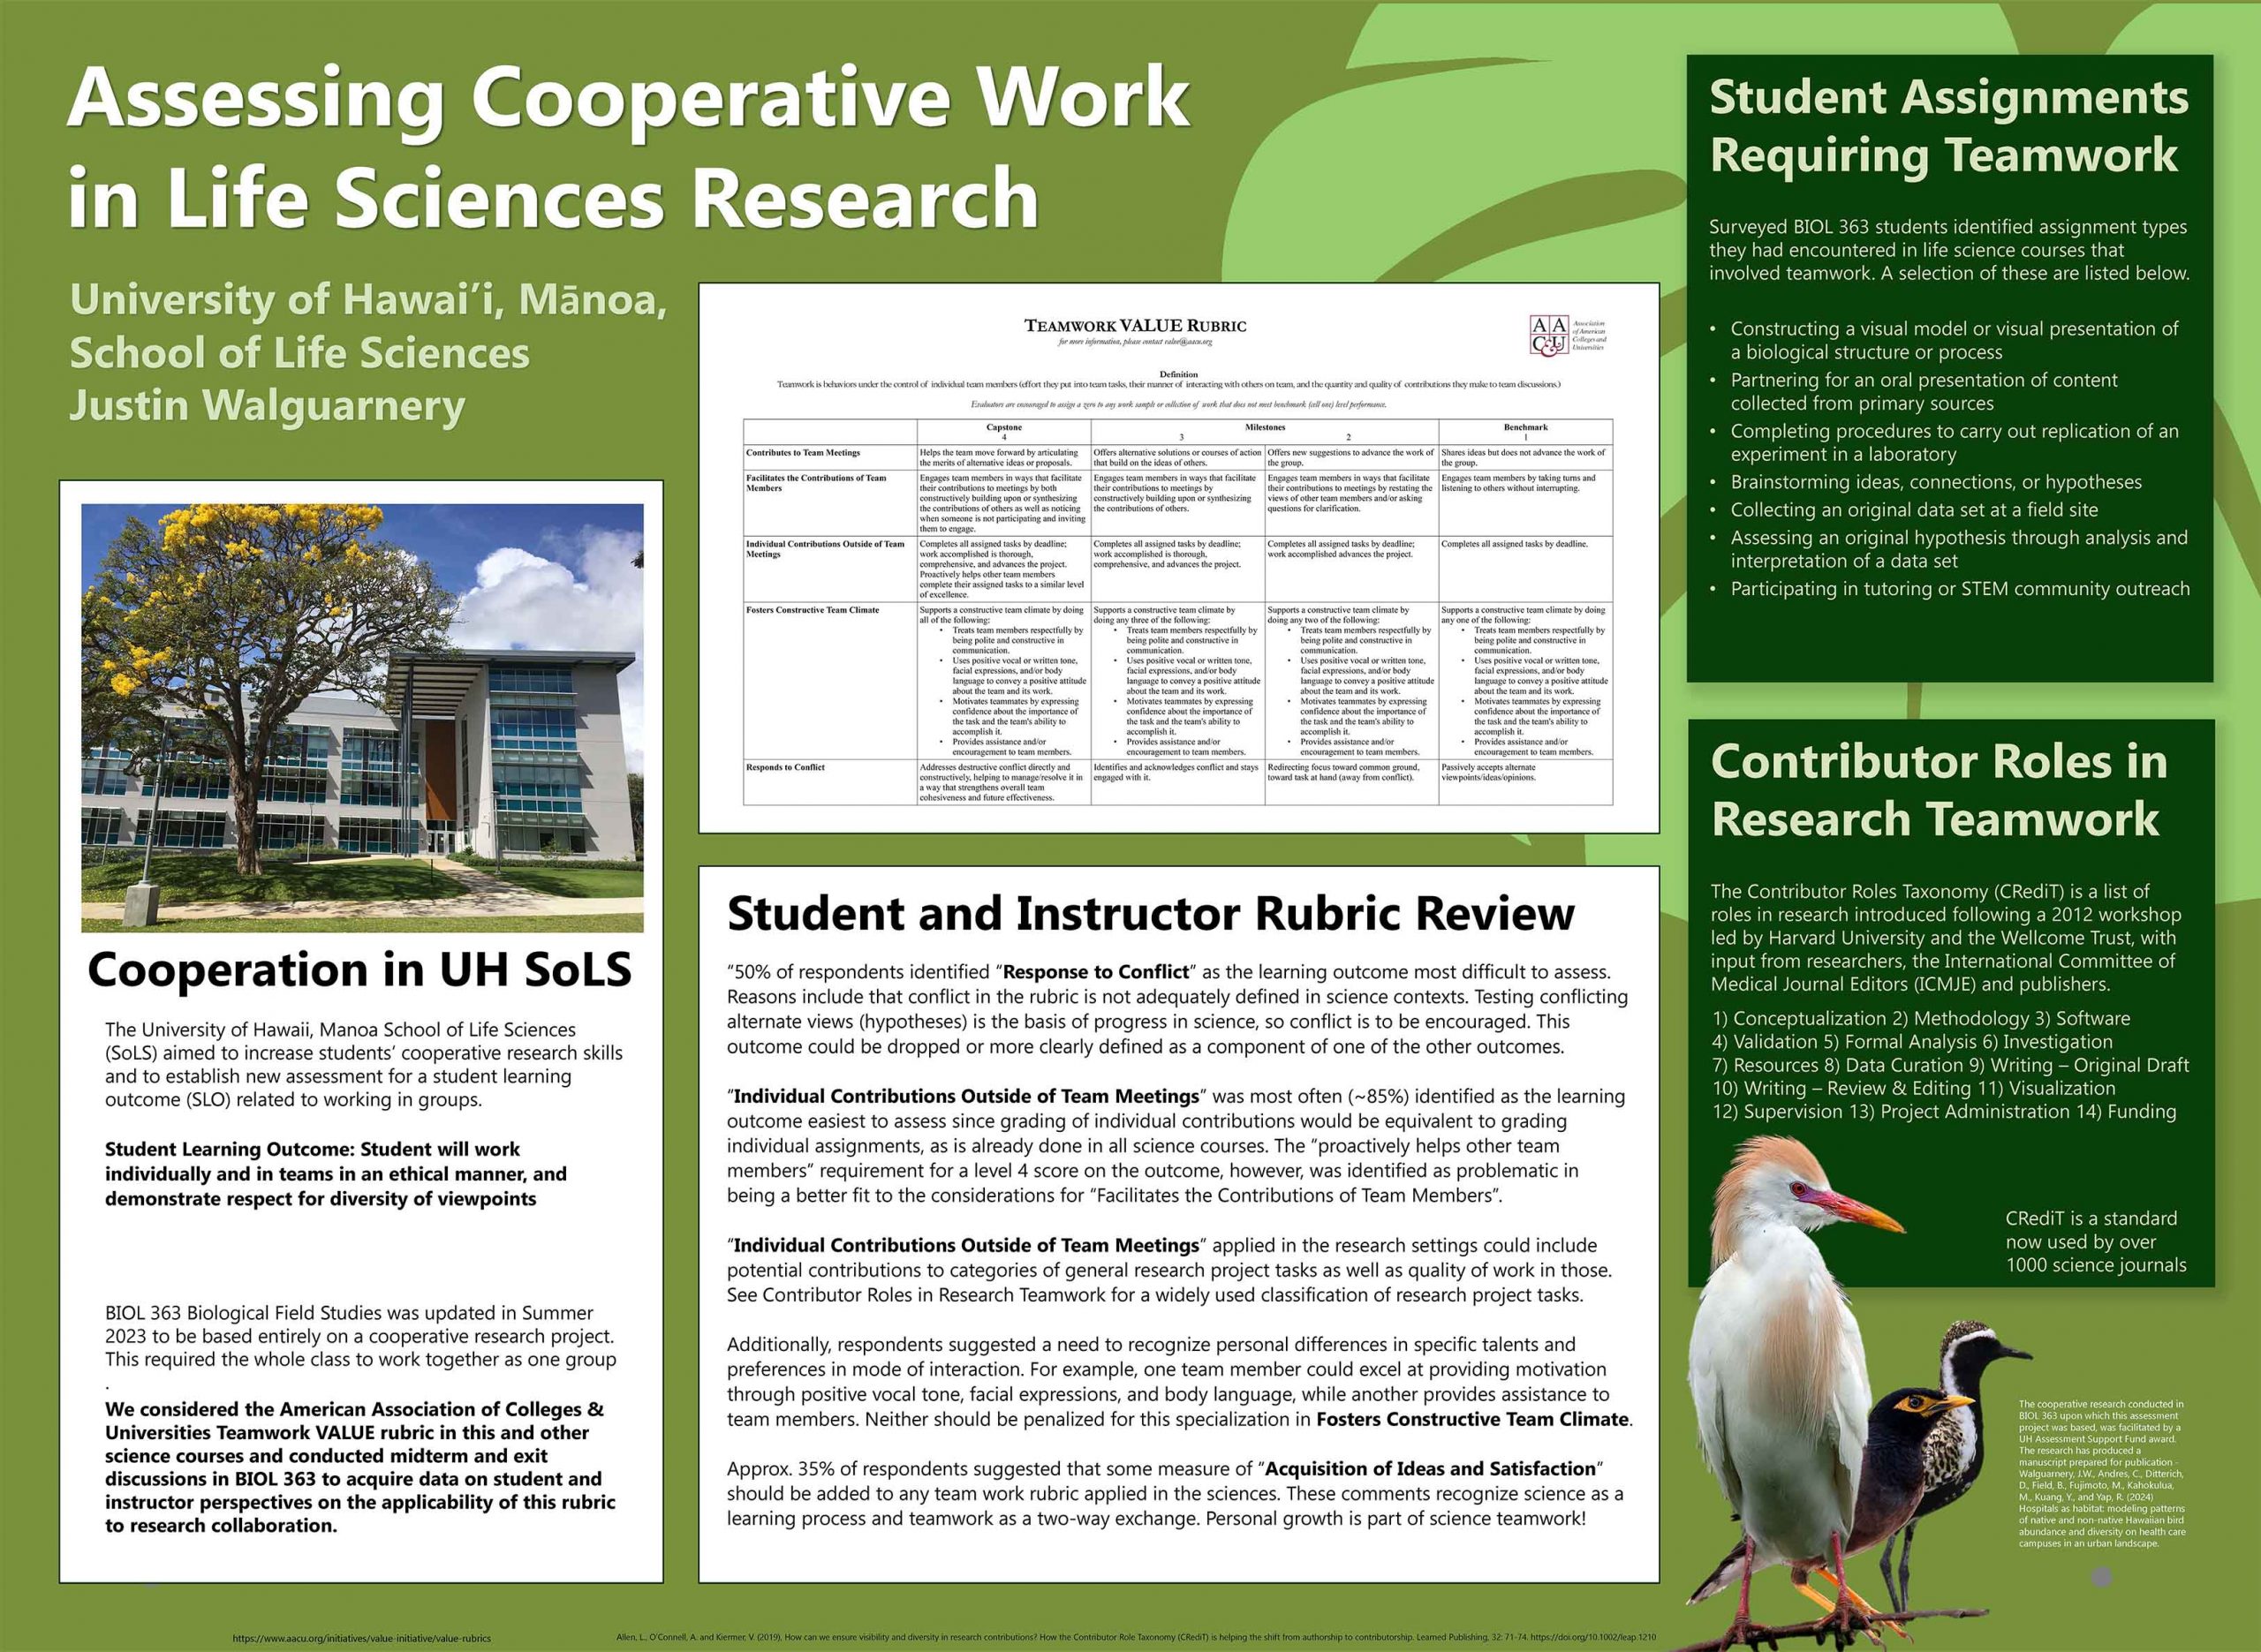 Assessing Cooperative Work in Life sciences Research